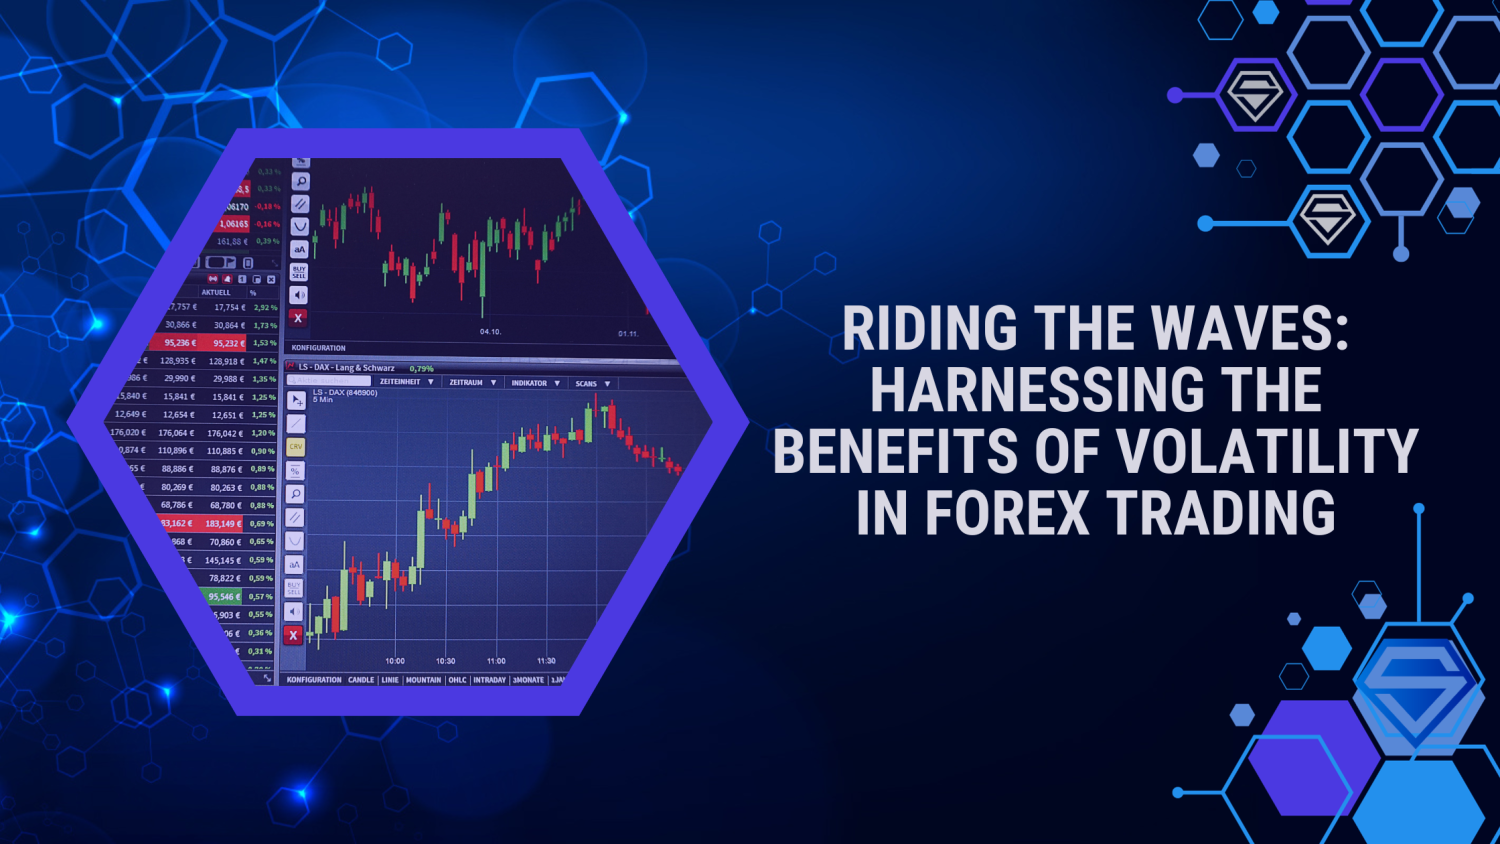 What are the  Advantages of Volatility in Forex Trading